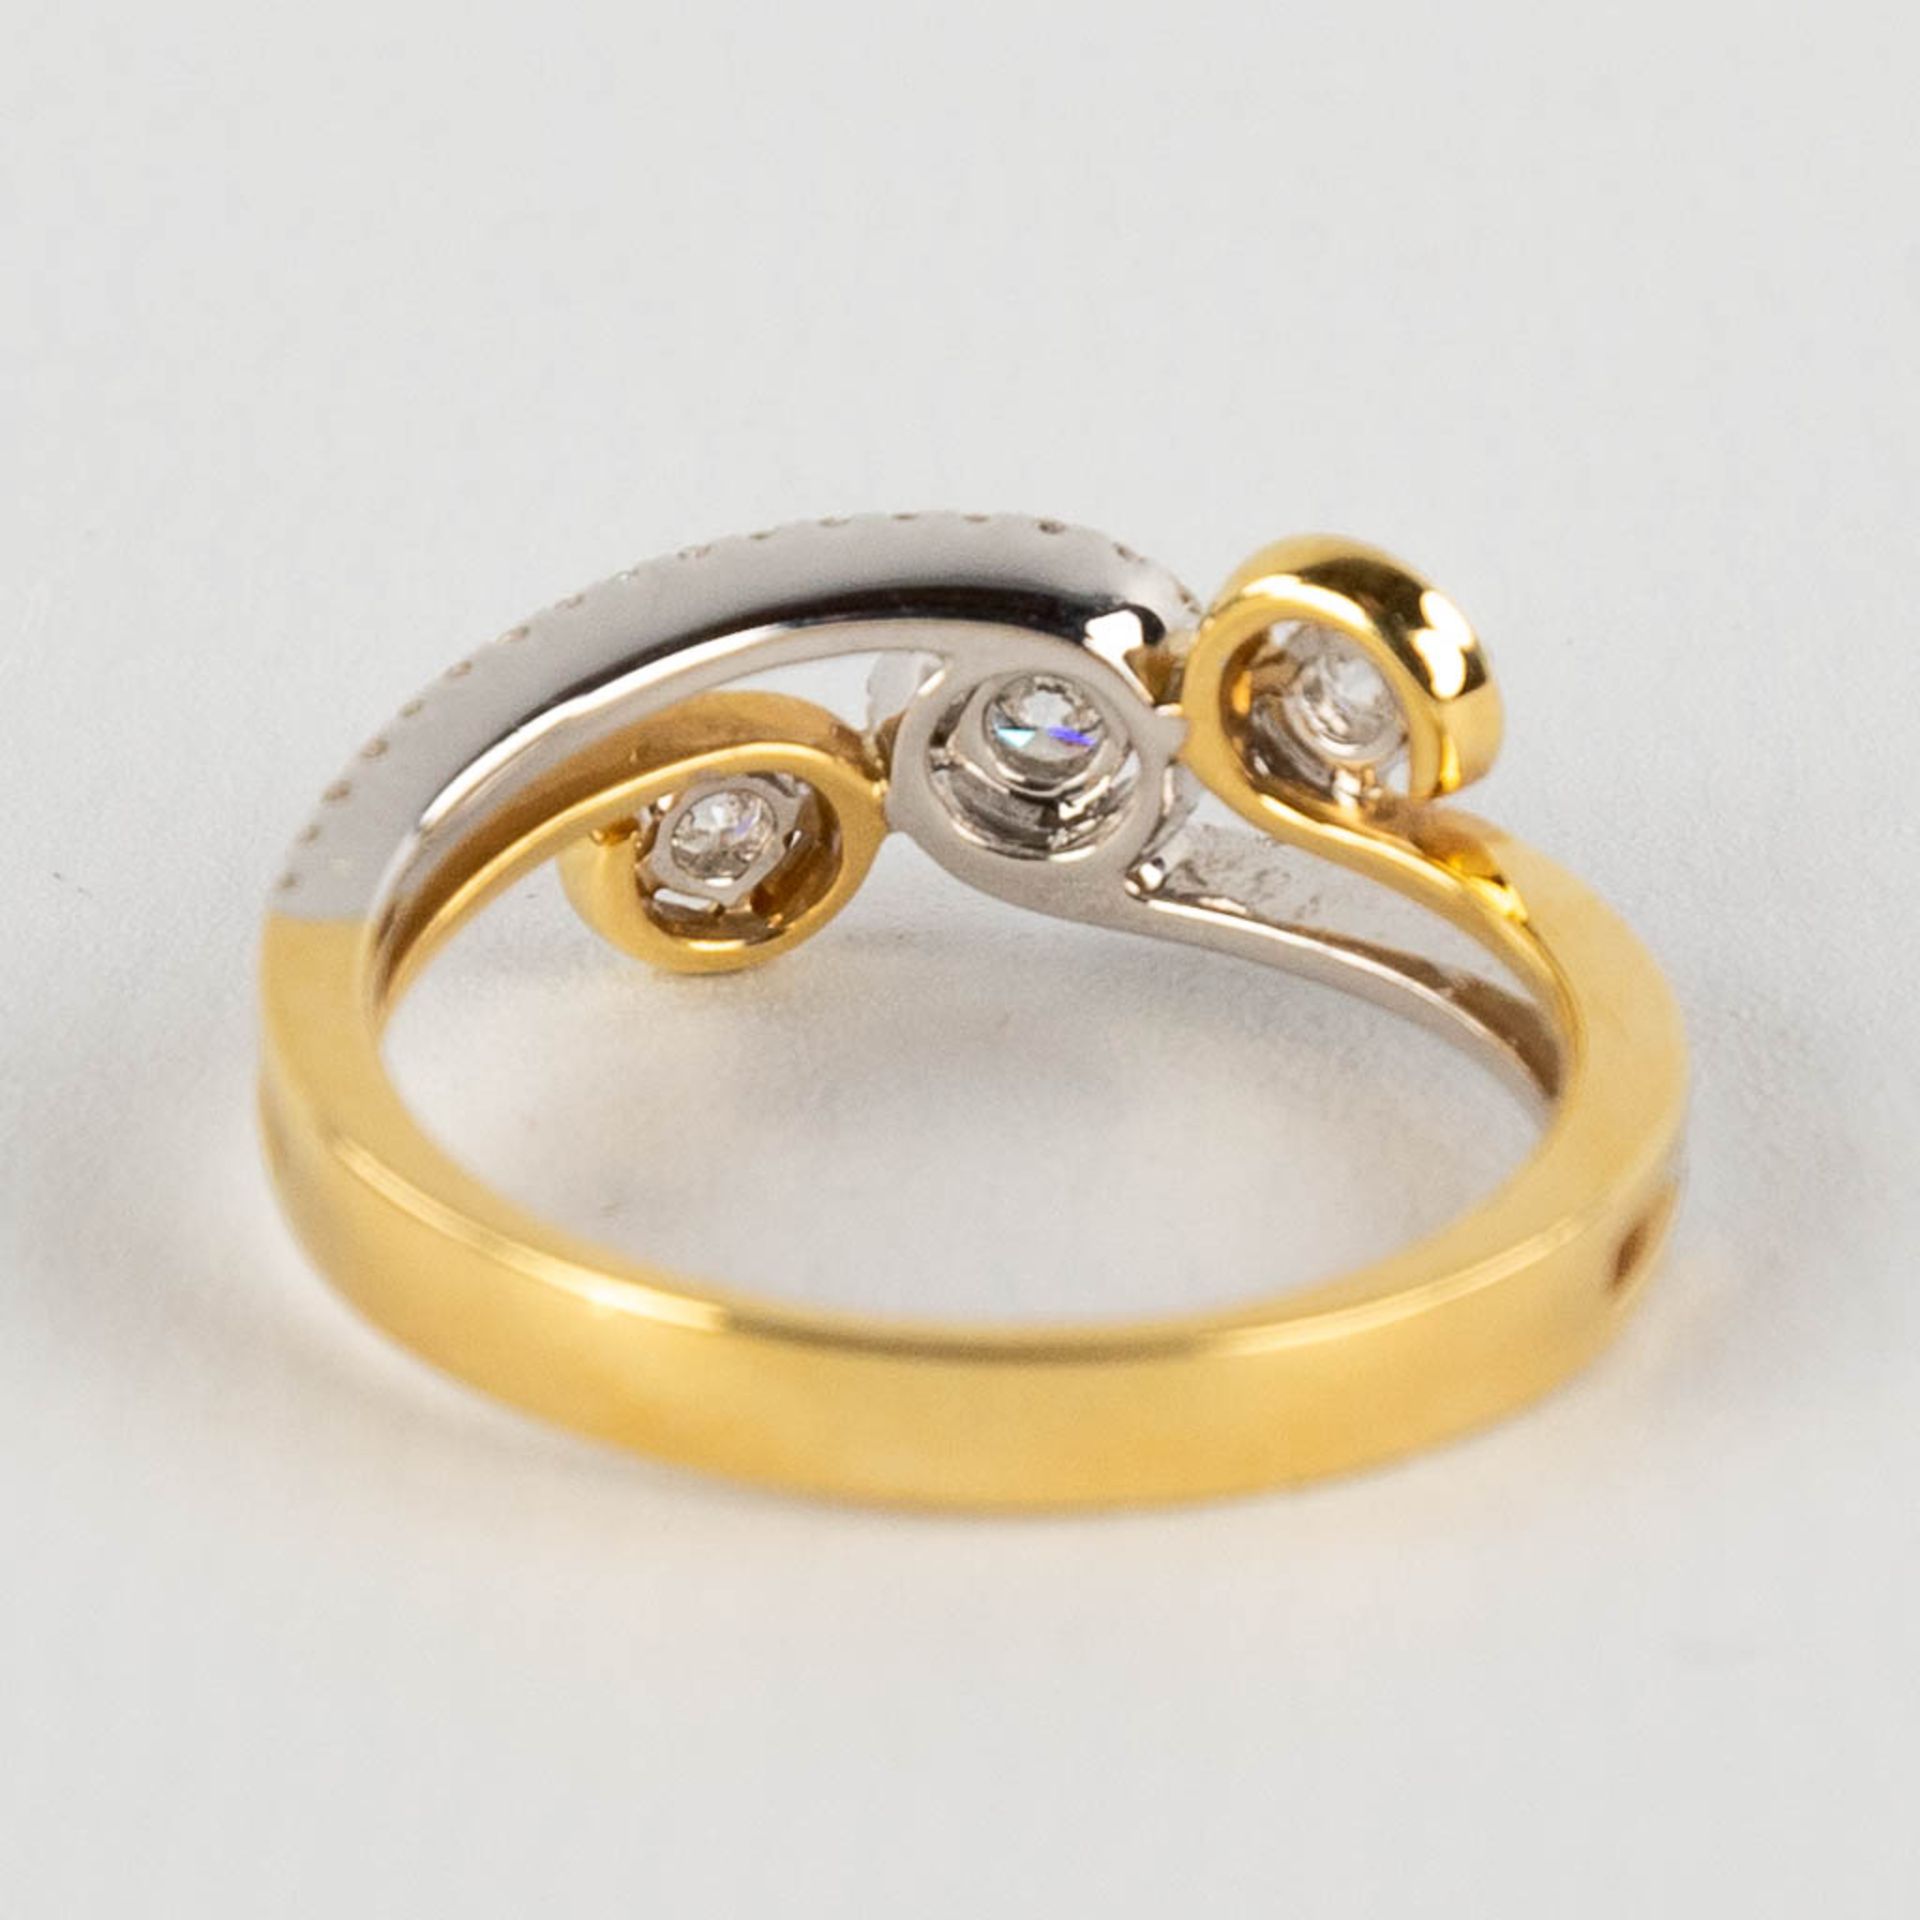 A ring, 18kt yellow and white gold with diamonds, appr. 0,48ct. Ring size 54. - Image 6 of 11